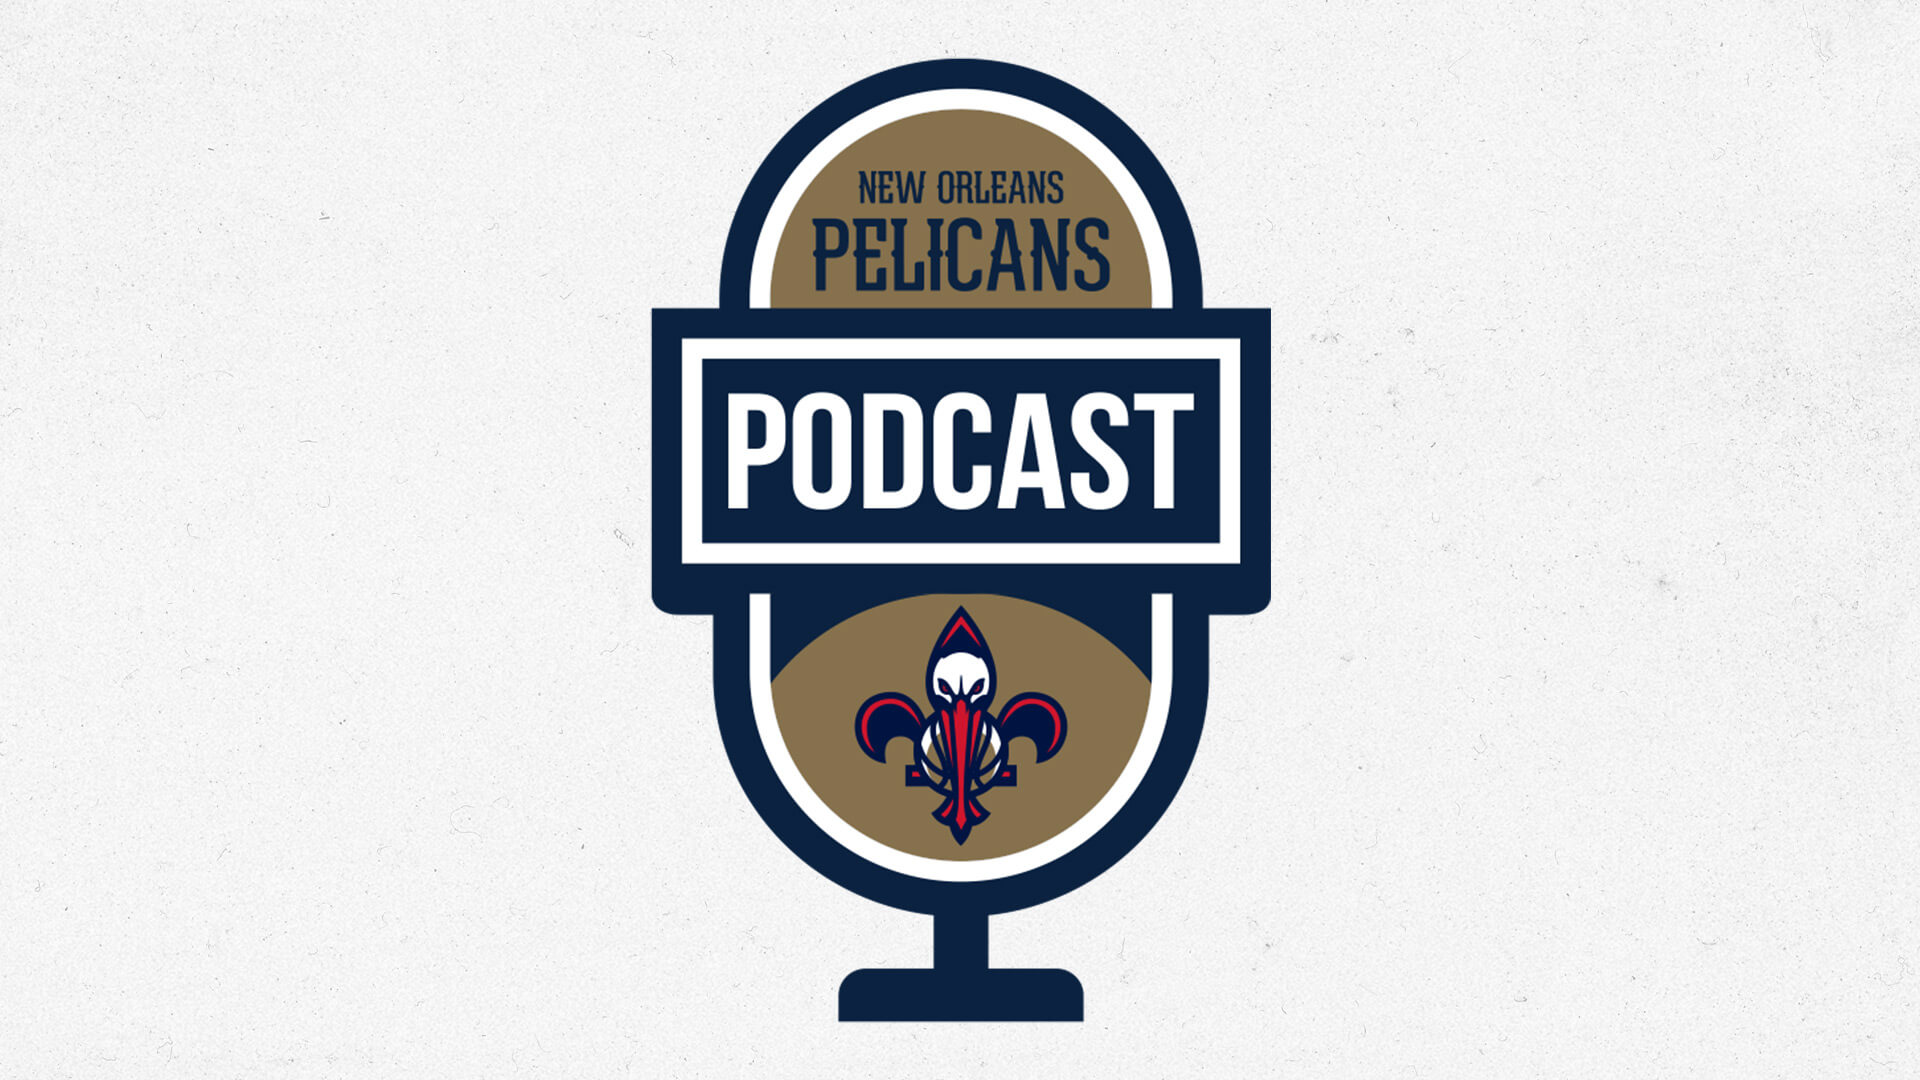 Les East on Nuggets loss, Western Conference standings, NBA All-Star | Pelicans Podcast